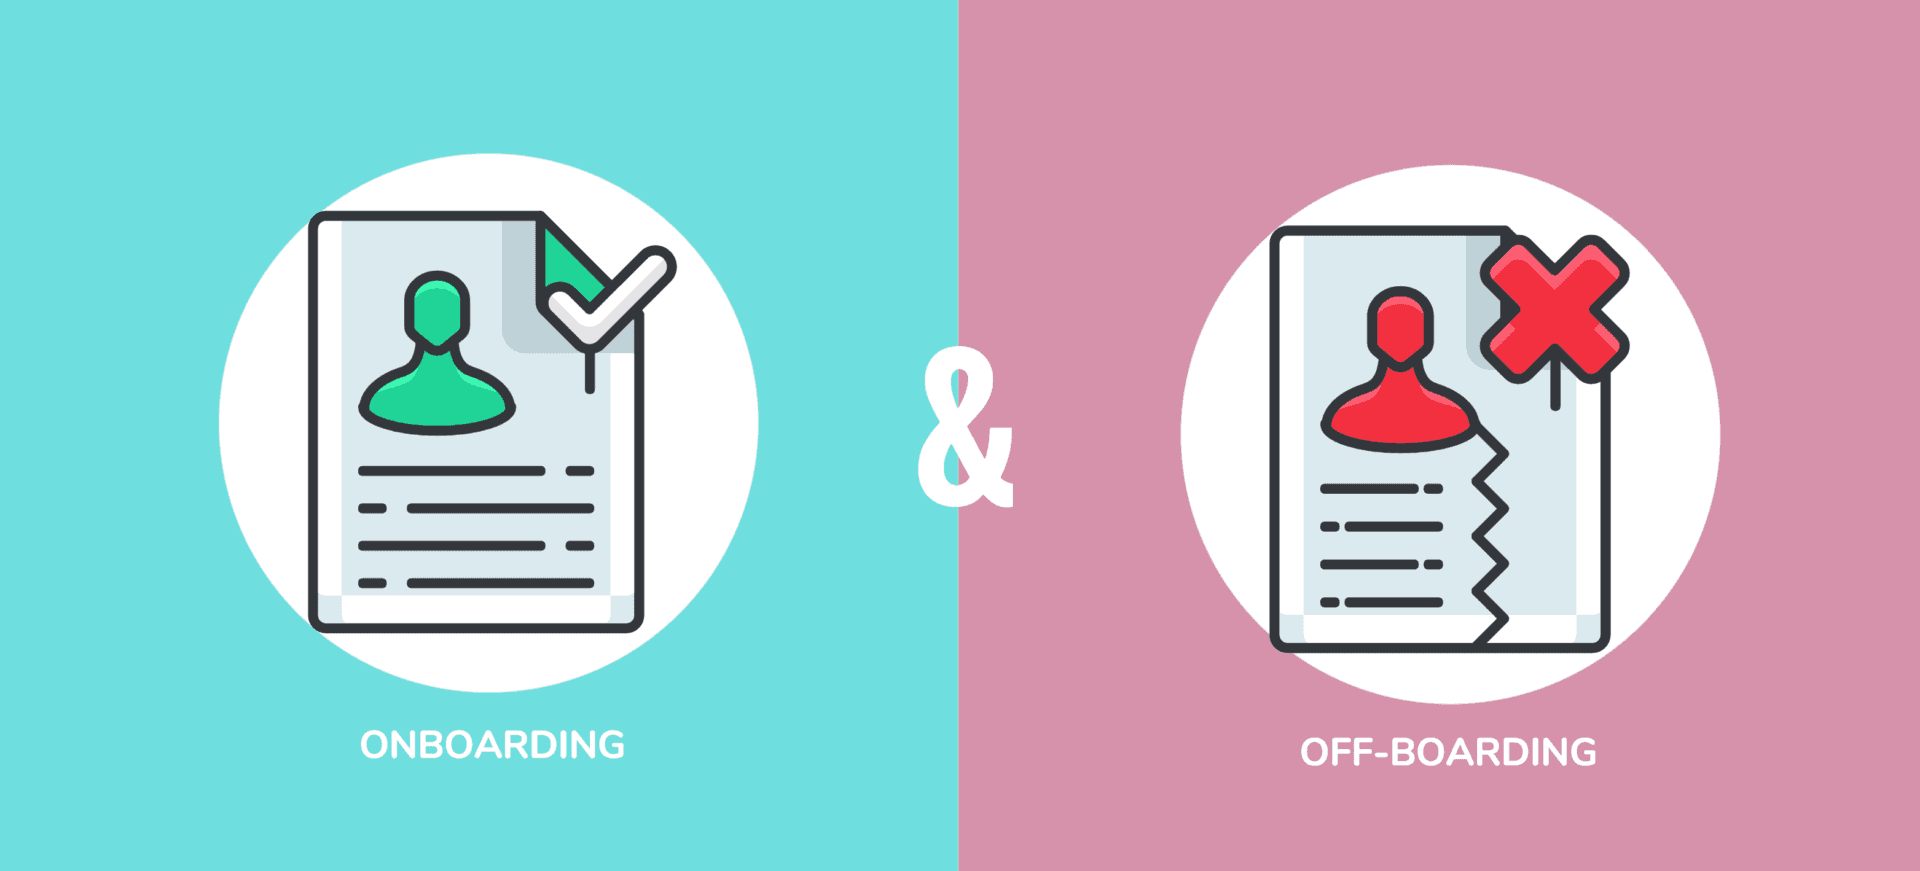 Onboarding and offboarding